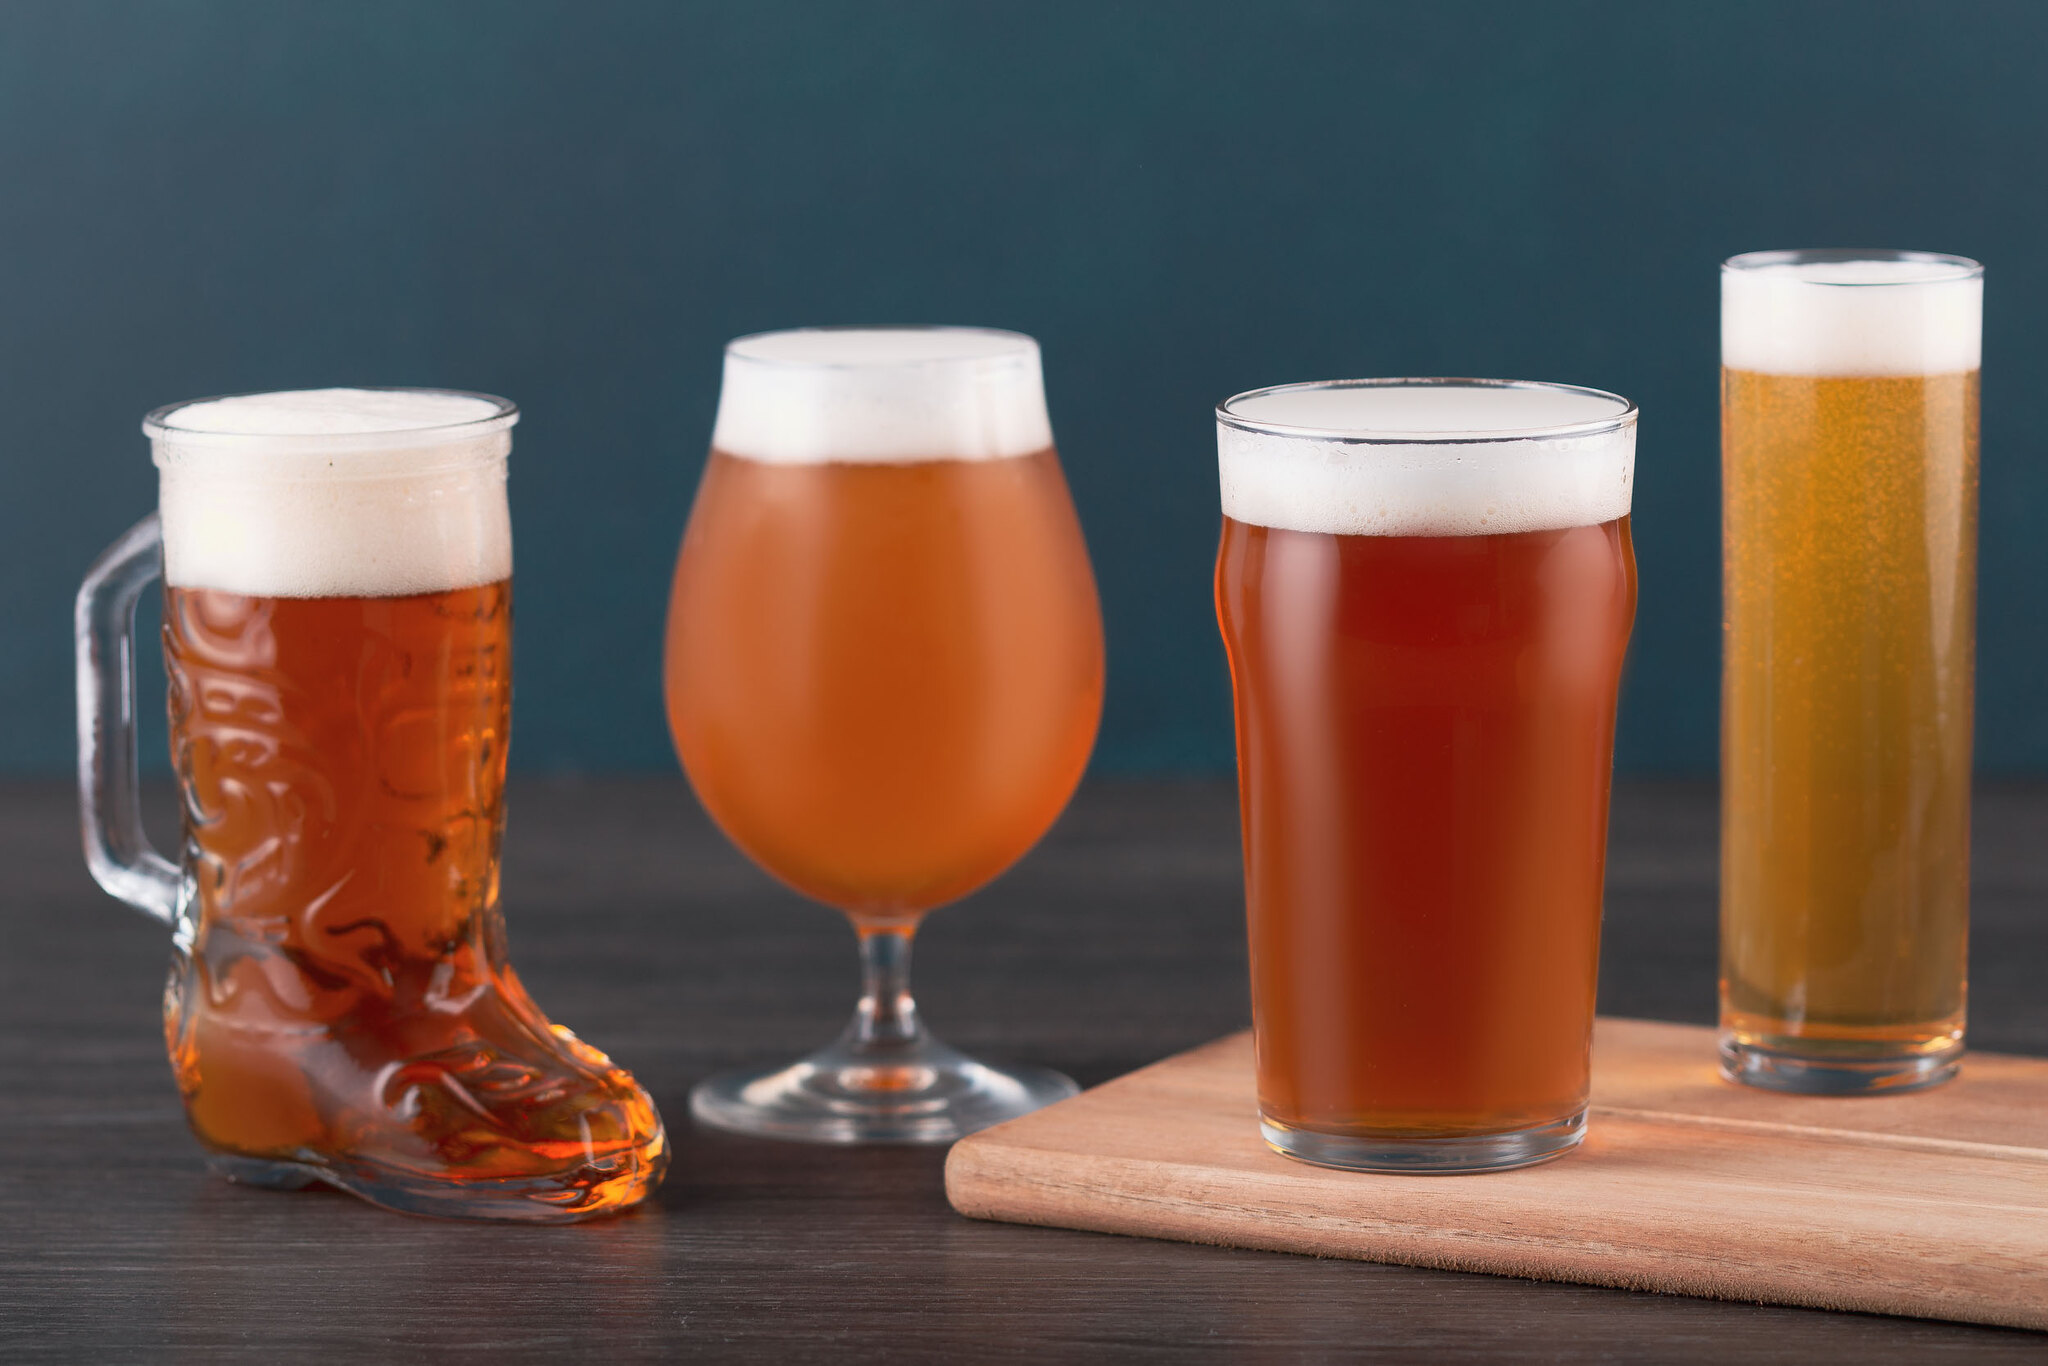 Beer Glassware Guide: Beer Glass Types and Uses